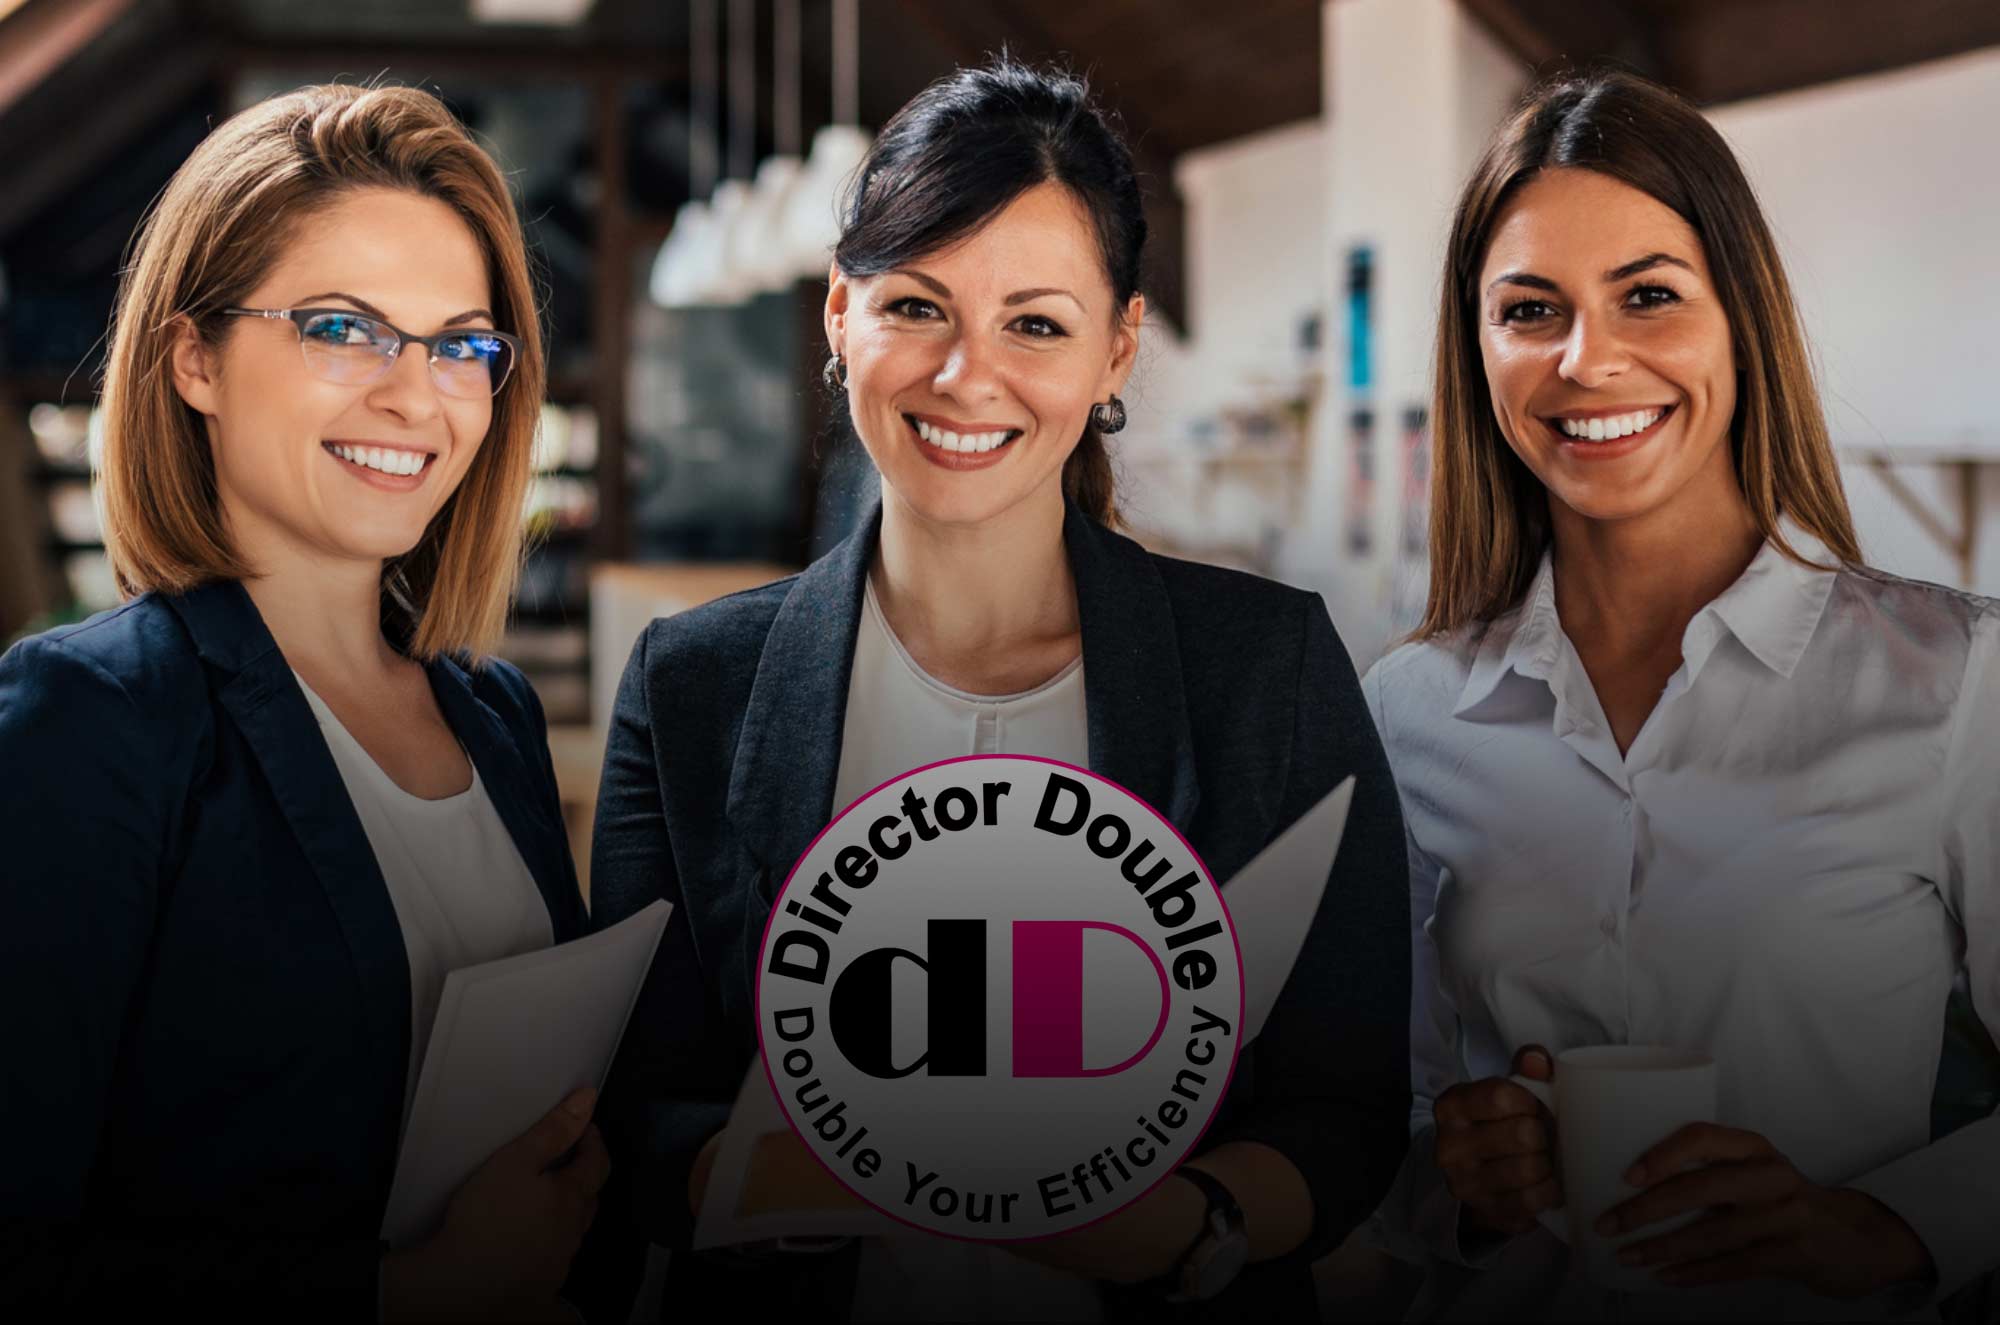 Women owned businesses including Mary Kay Directors thrive with DirectorDouble.com